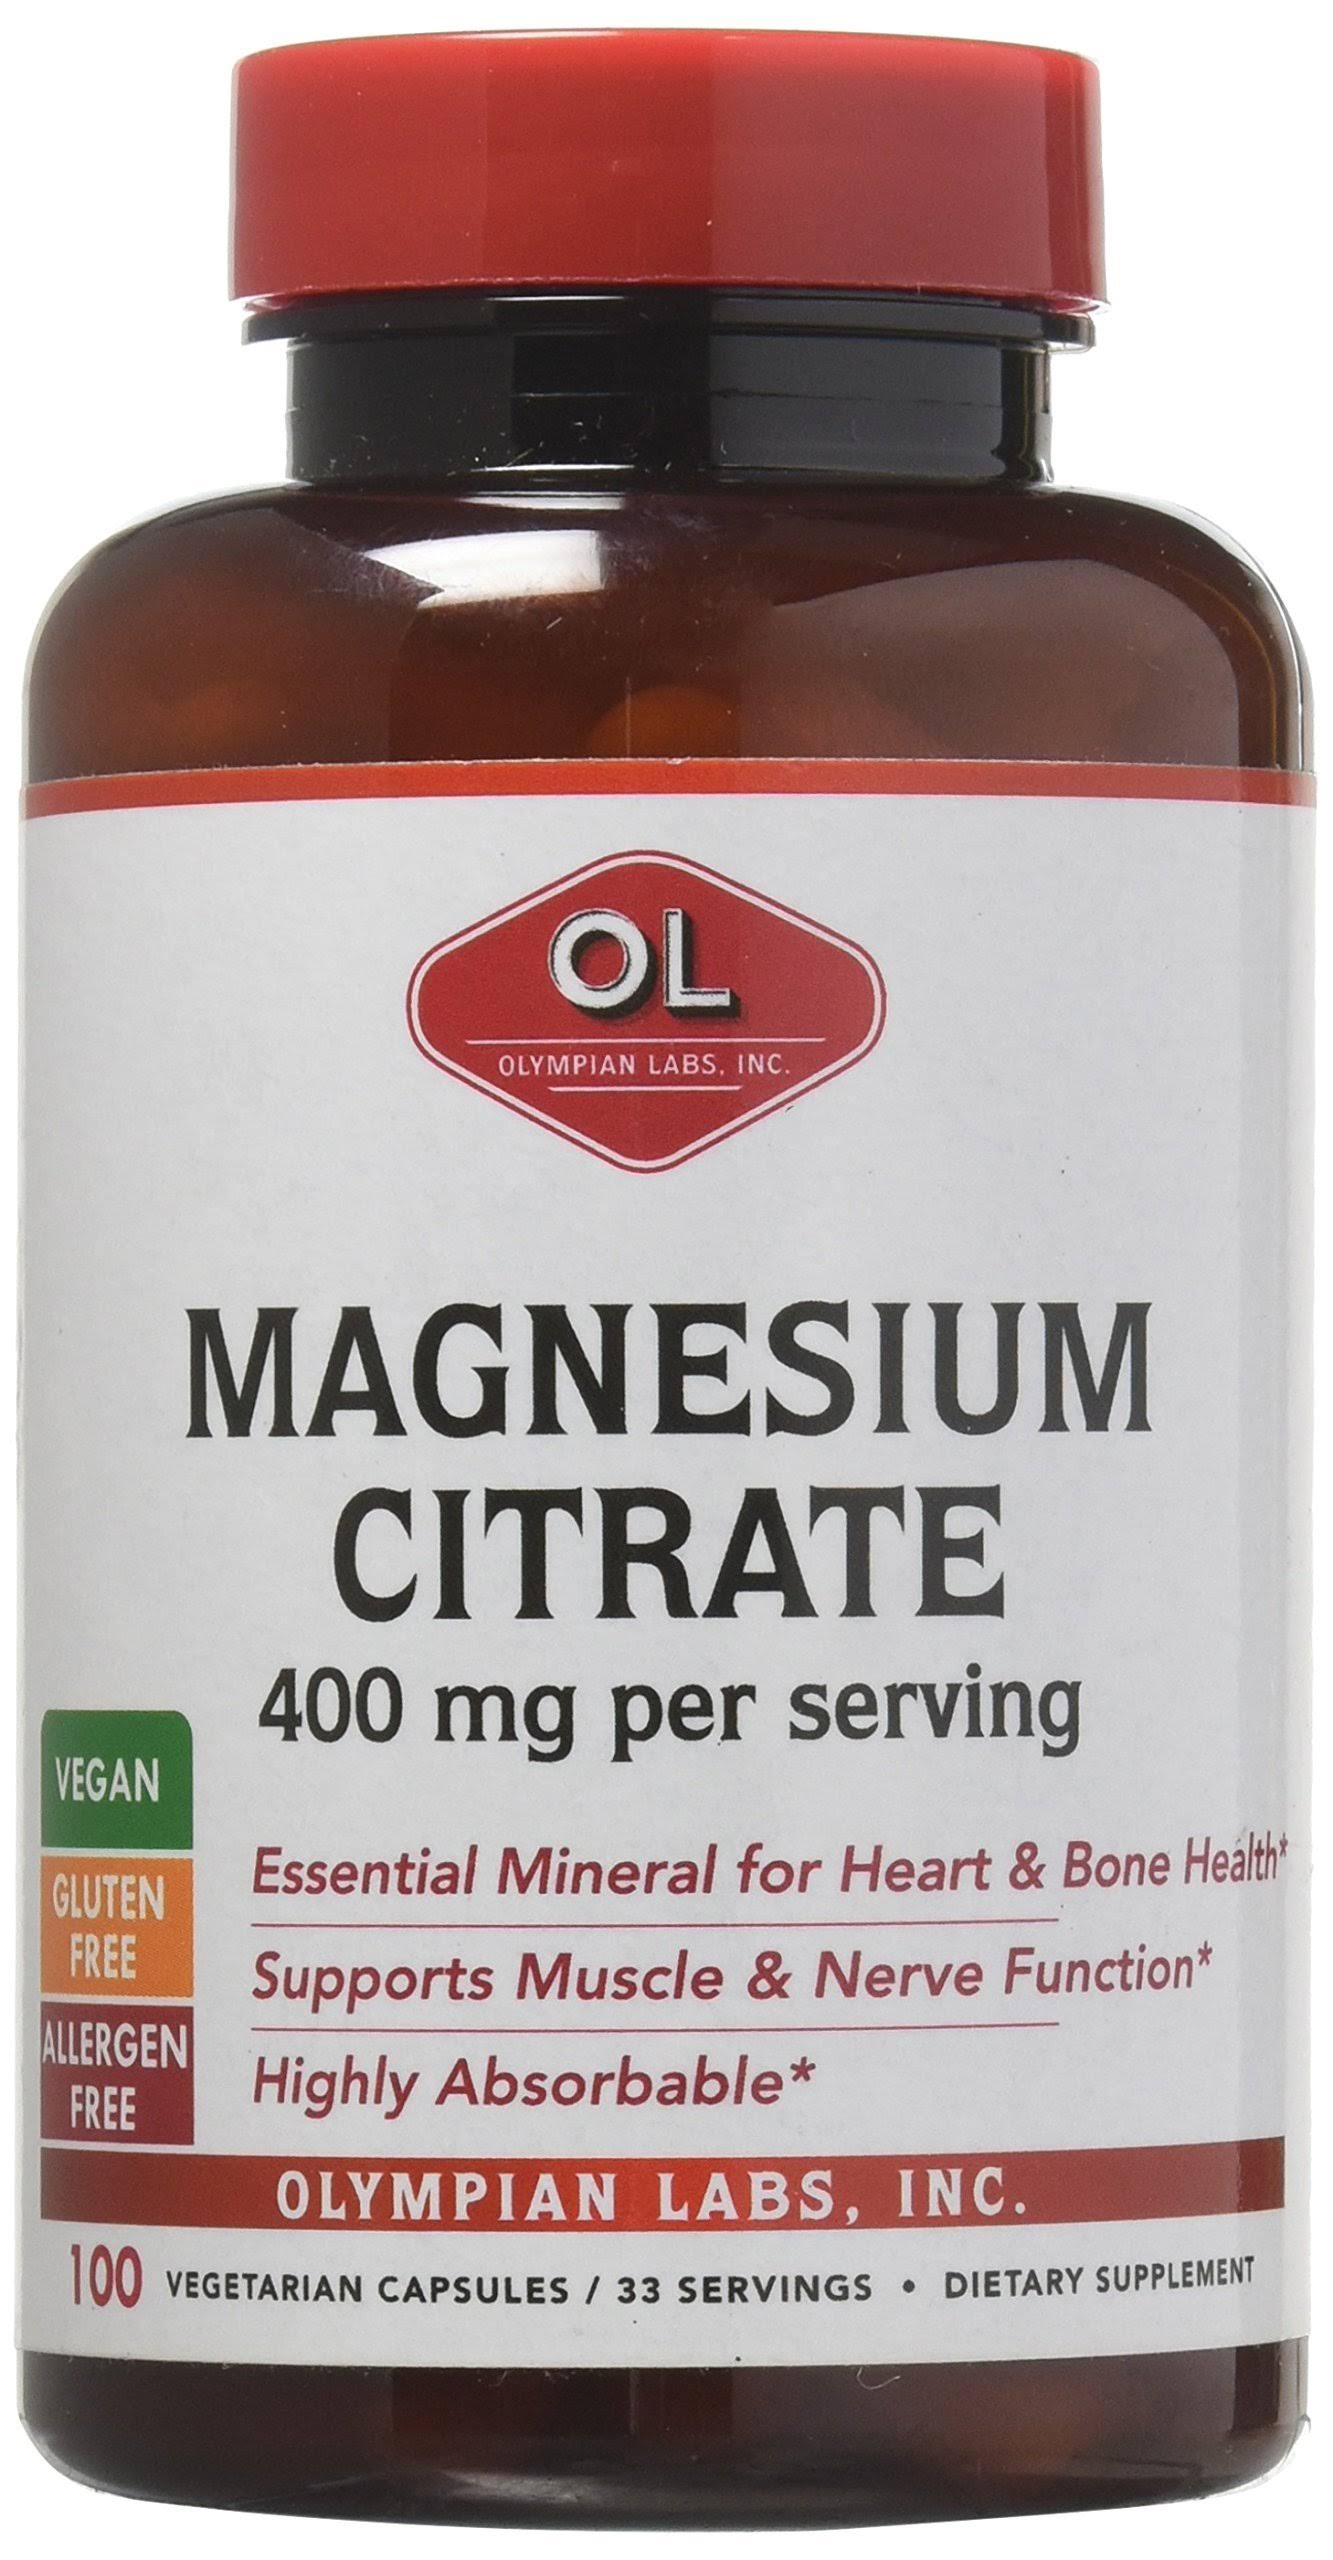 Olympian Labs Magnesium Citrate Supplement - 400mg, 100ct